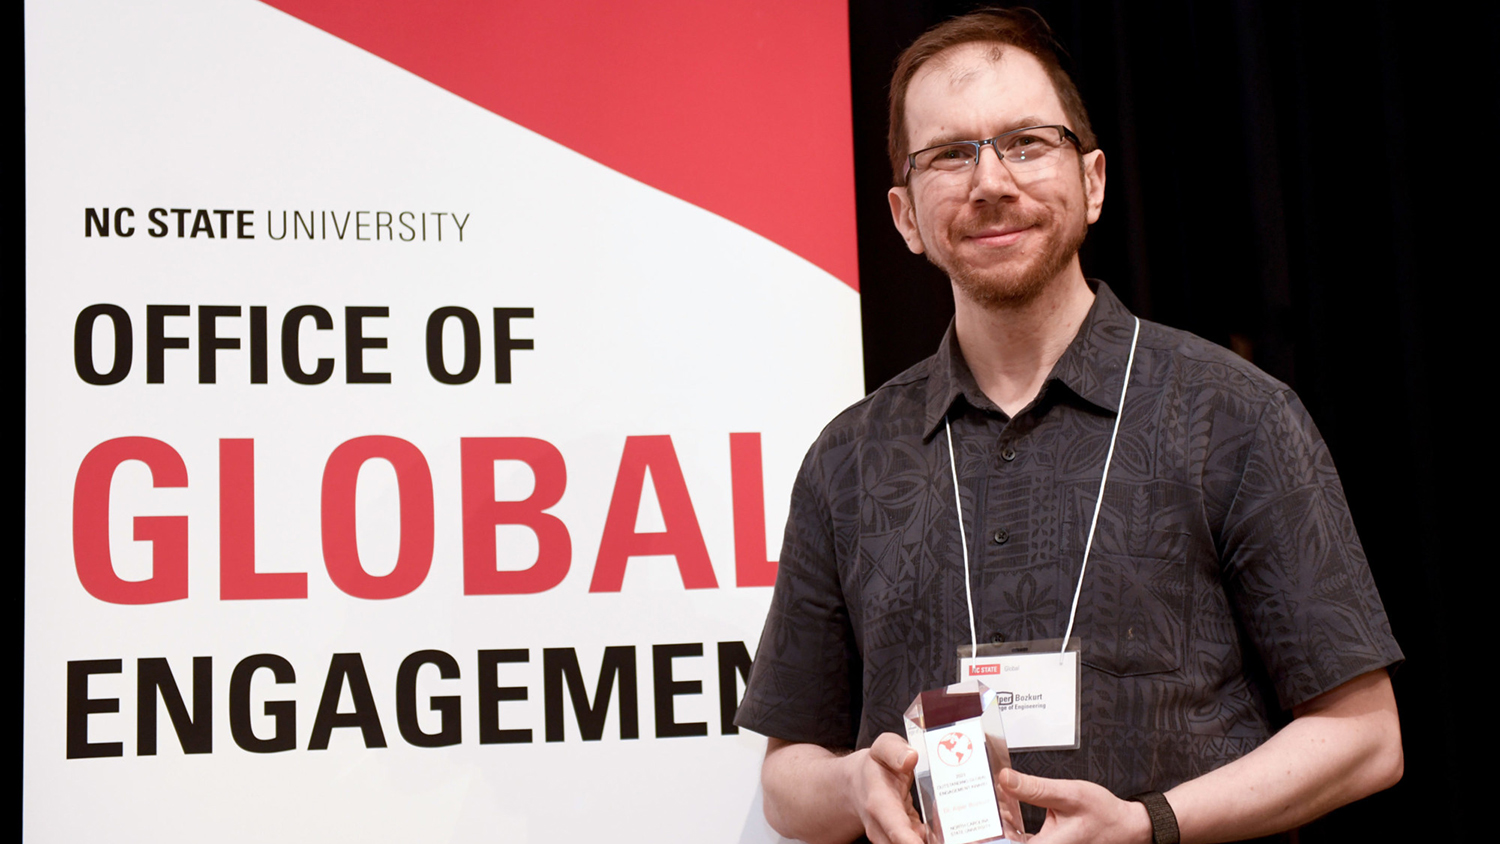 Alper Bozkurt holds his award whiile posing for a photo in front of the Office of Global Engagement banner.